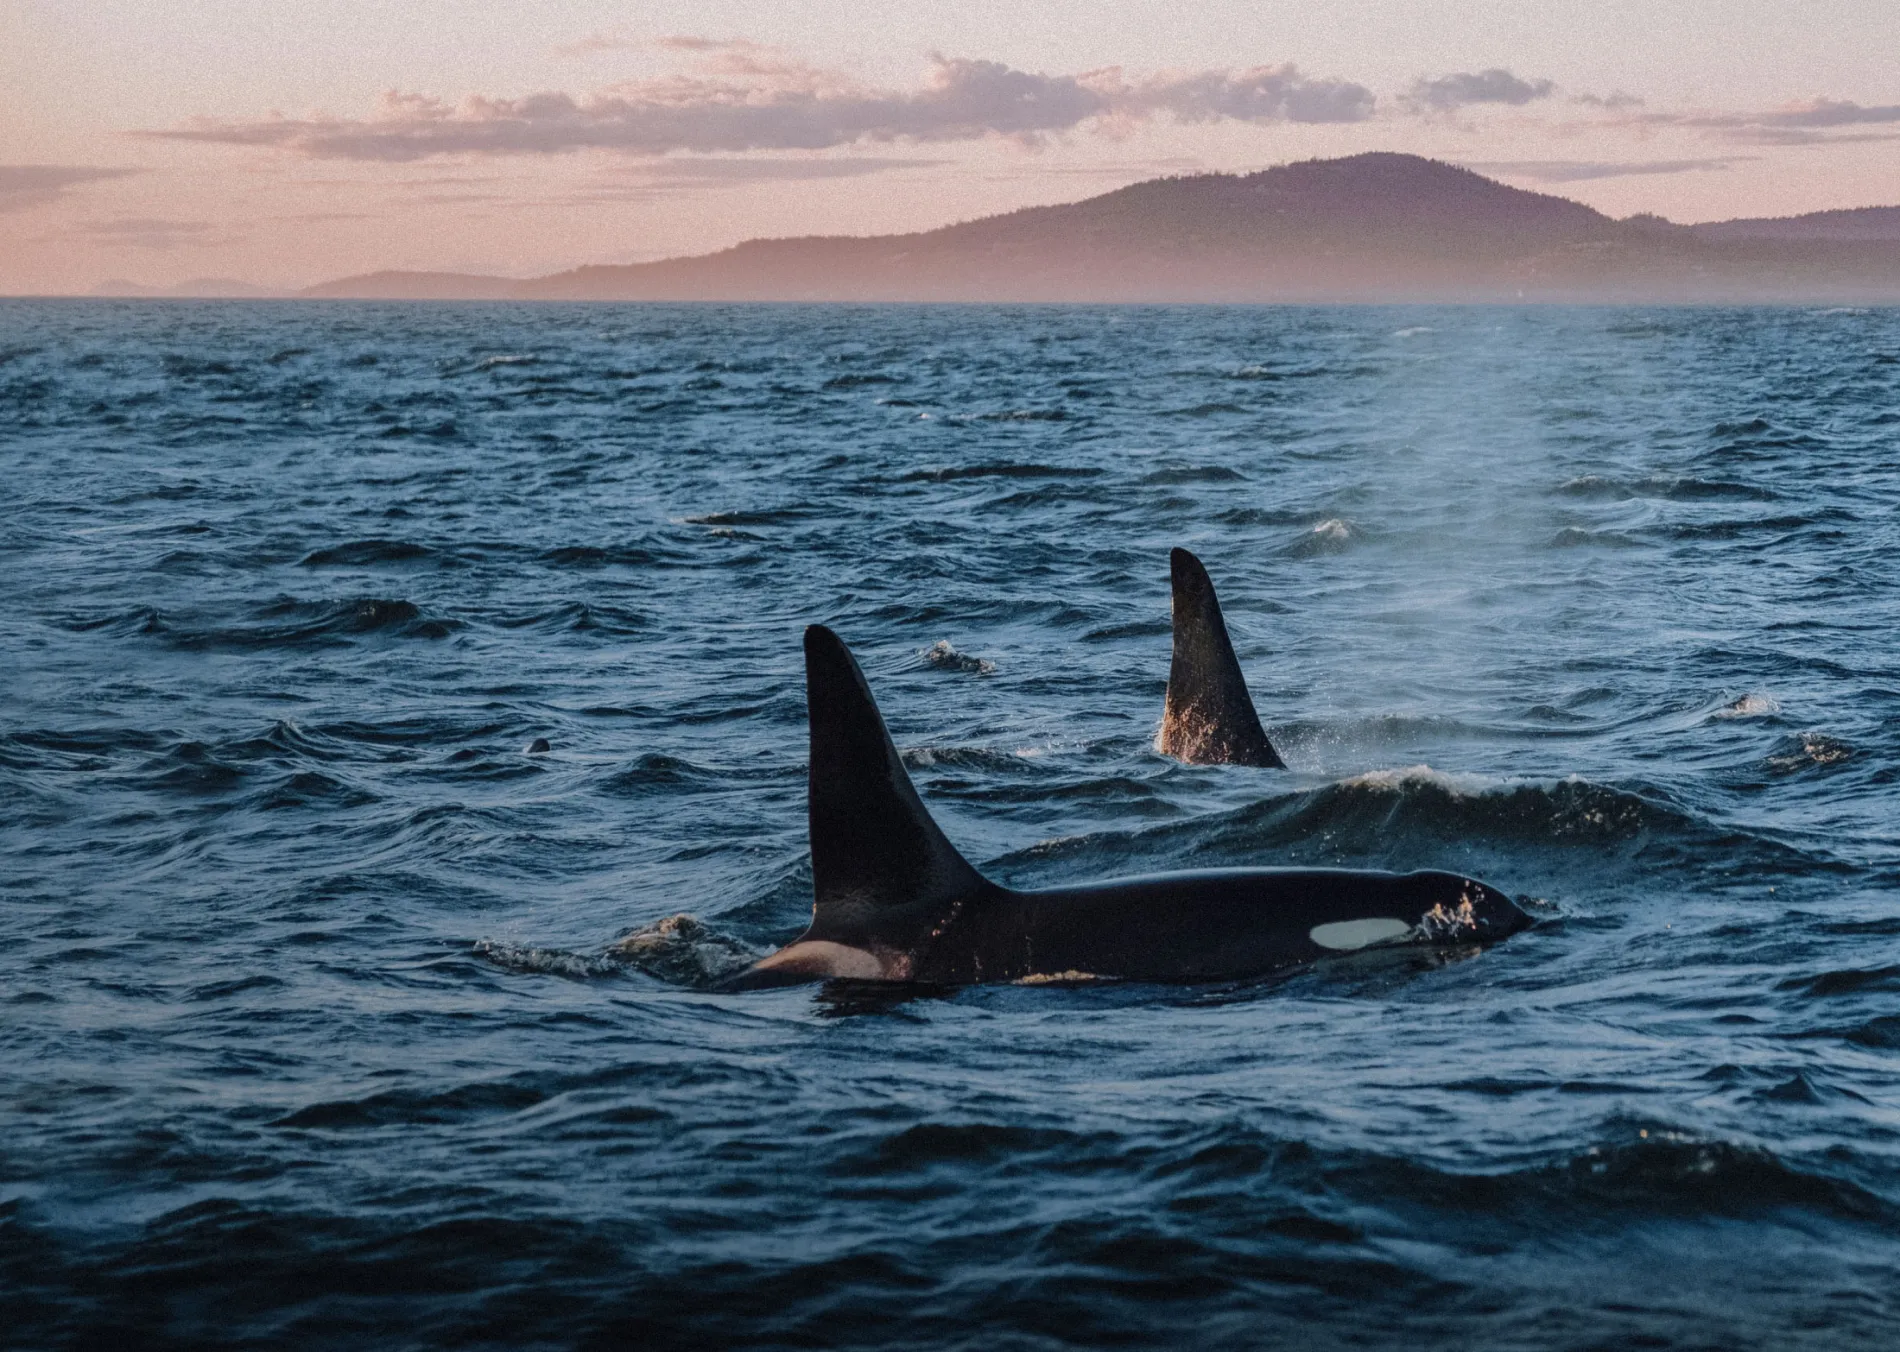 Orcas skimming the surface of the ocean